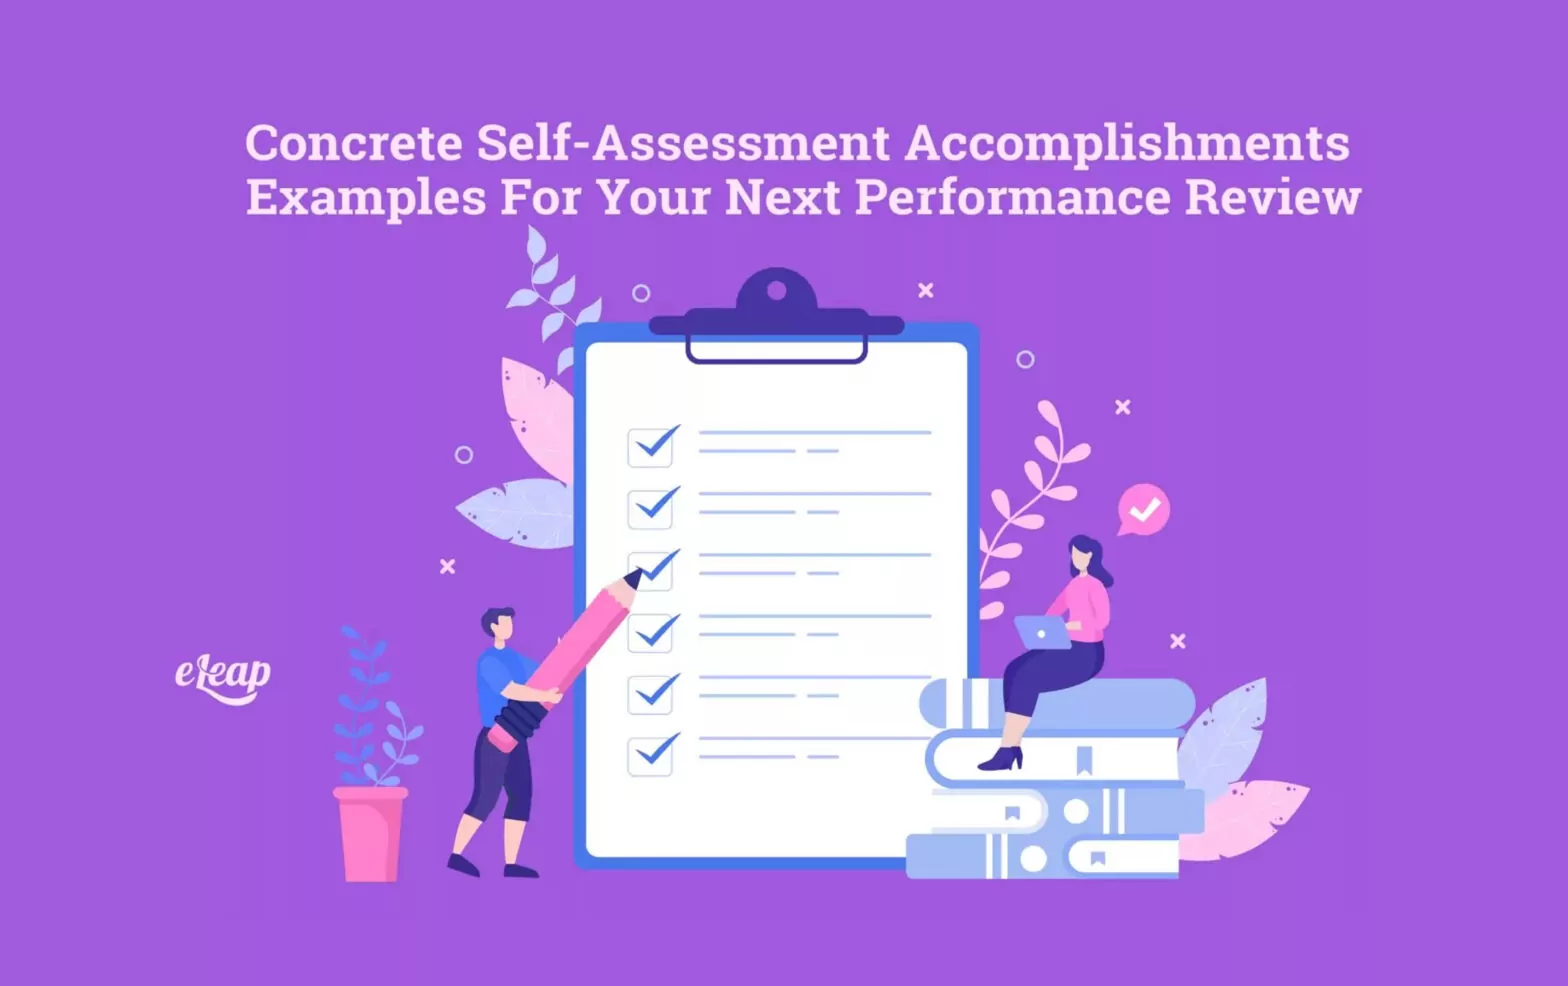 Concrete Self-Assessment Accomplishments Examples for Your Next Performance Review